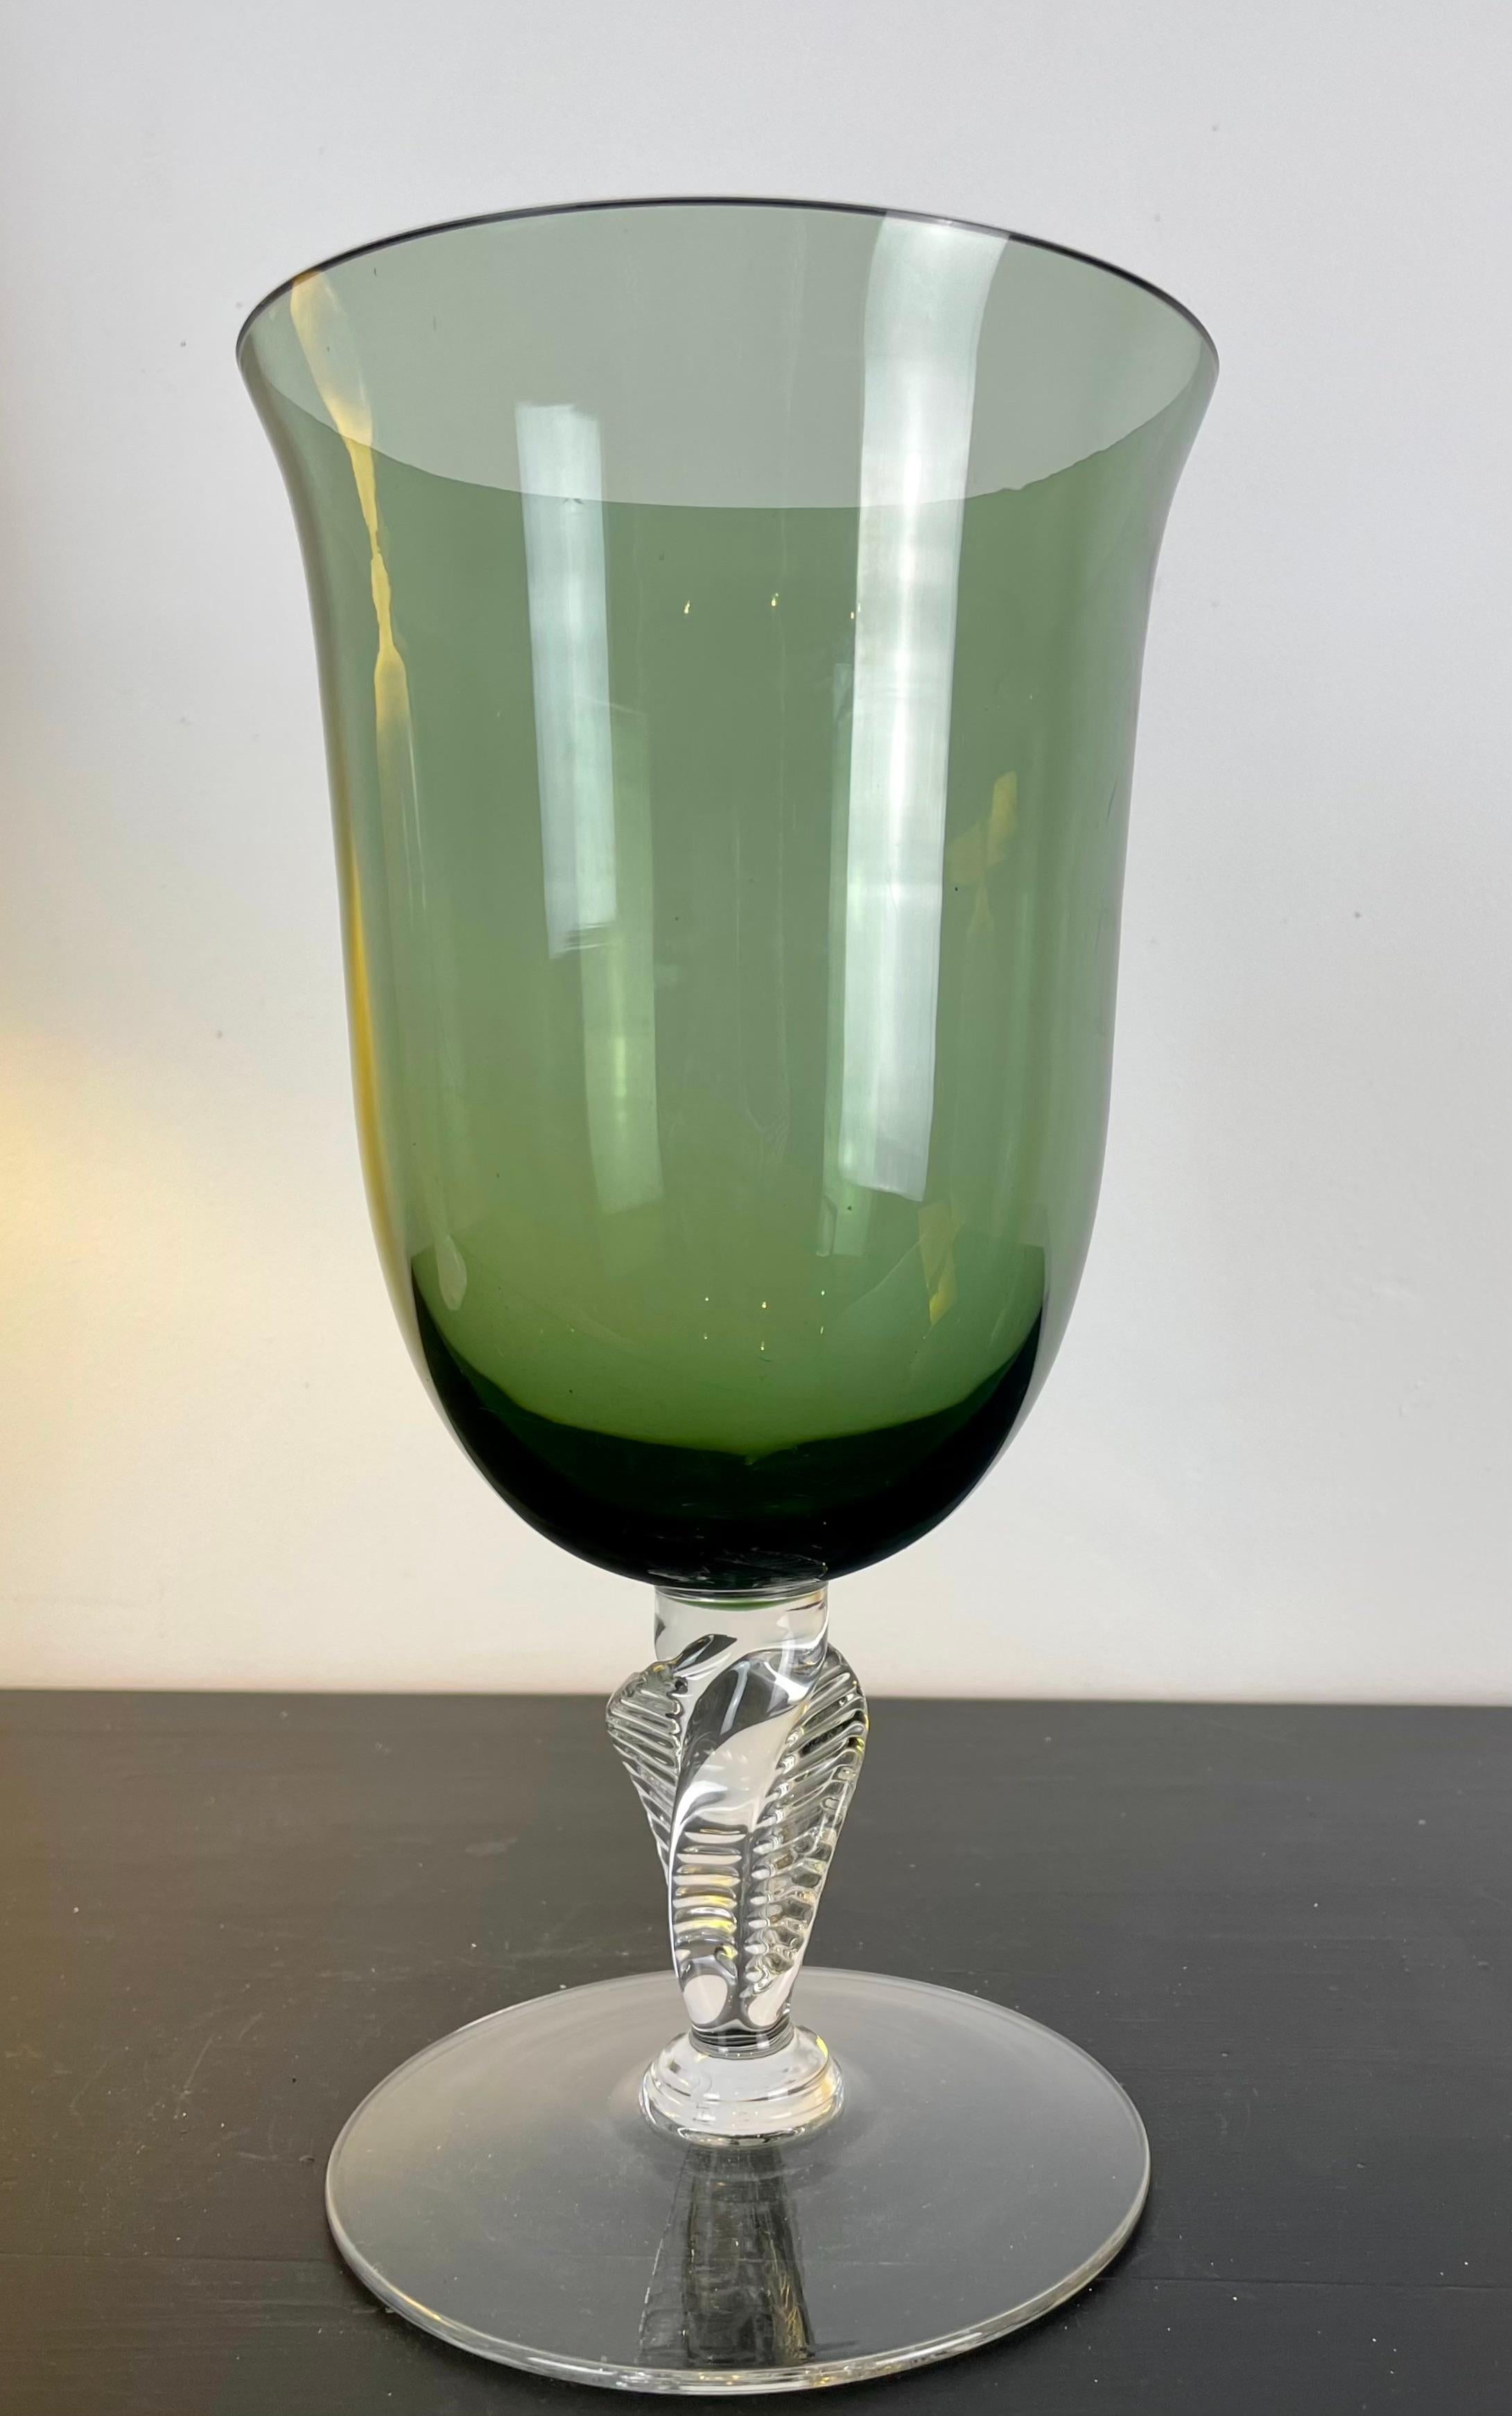 Elegant glass vase/bowl, twisted foot in transparent glass.
The cup is made of translucent green glass.
Blown glass.
In the style of Baccarat or Murano crystal.
A tiny chip around the edge of the cup, almost invisible.
Nice size - large